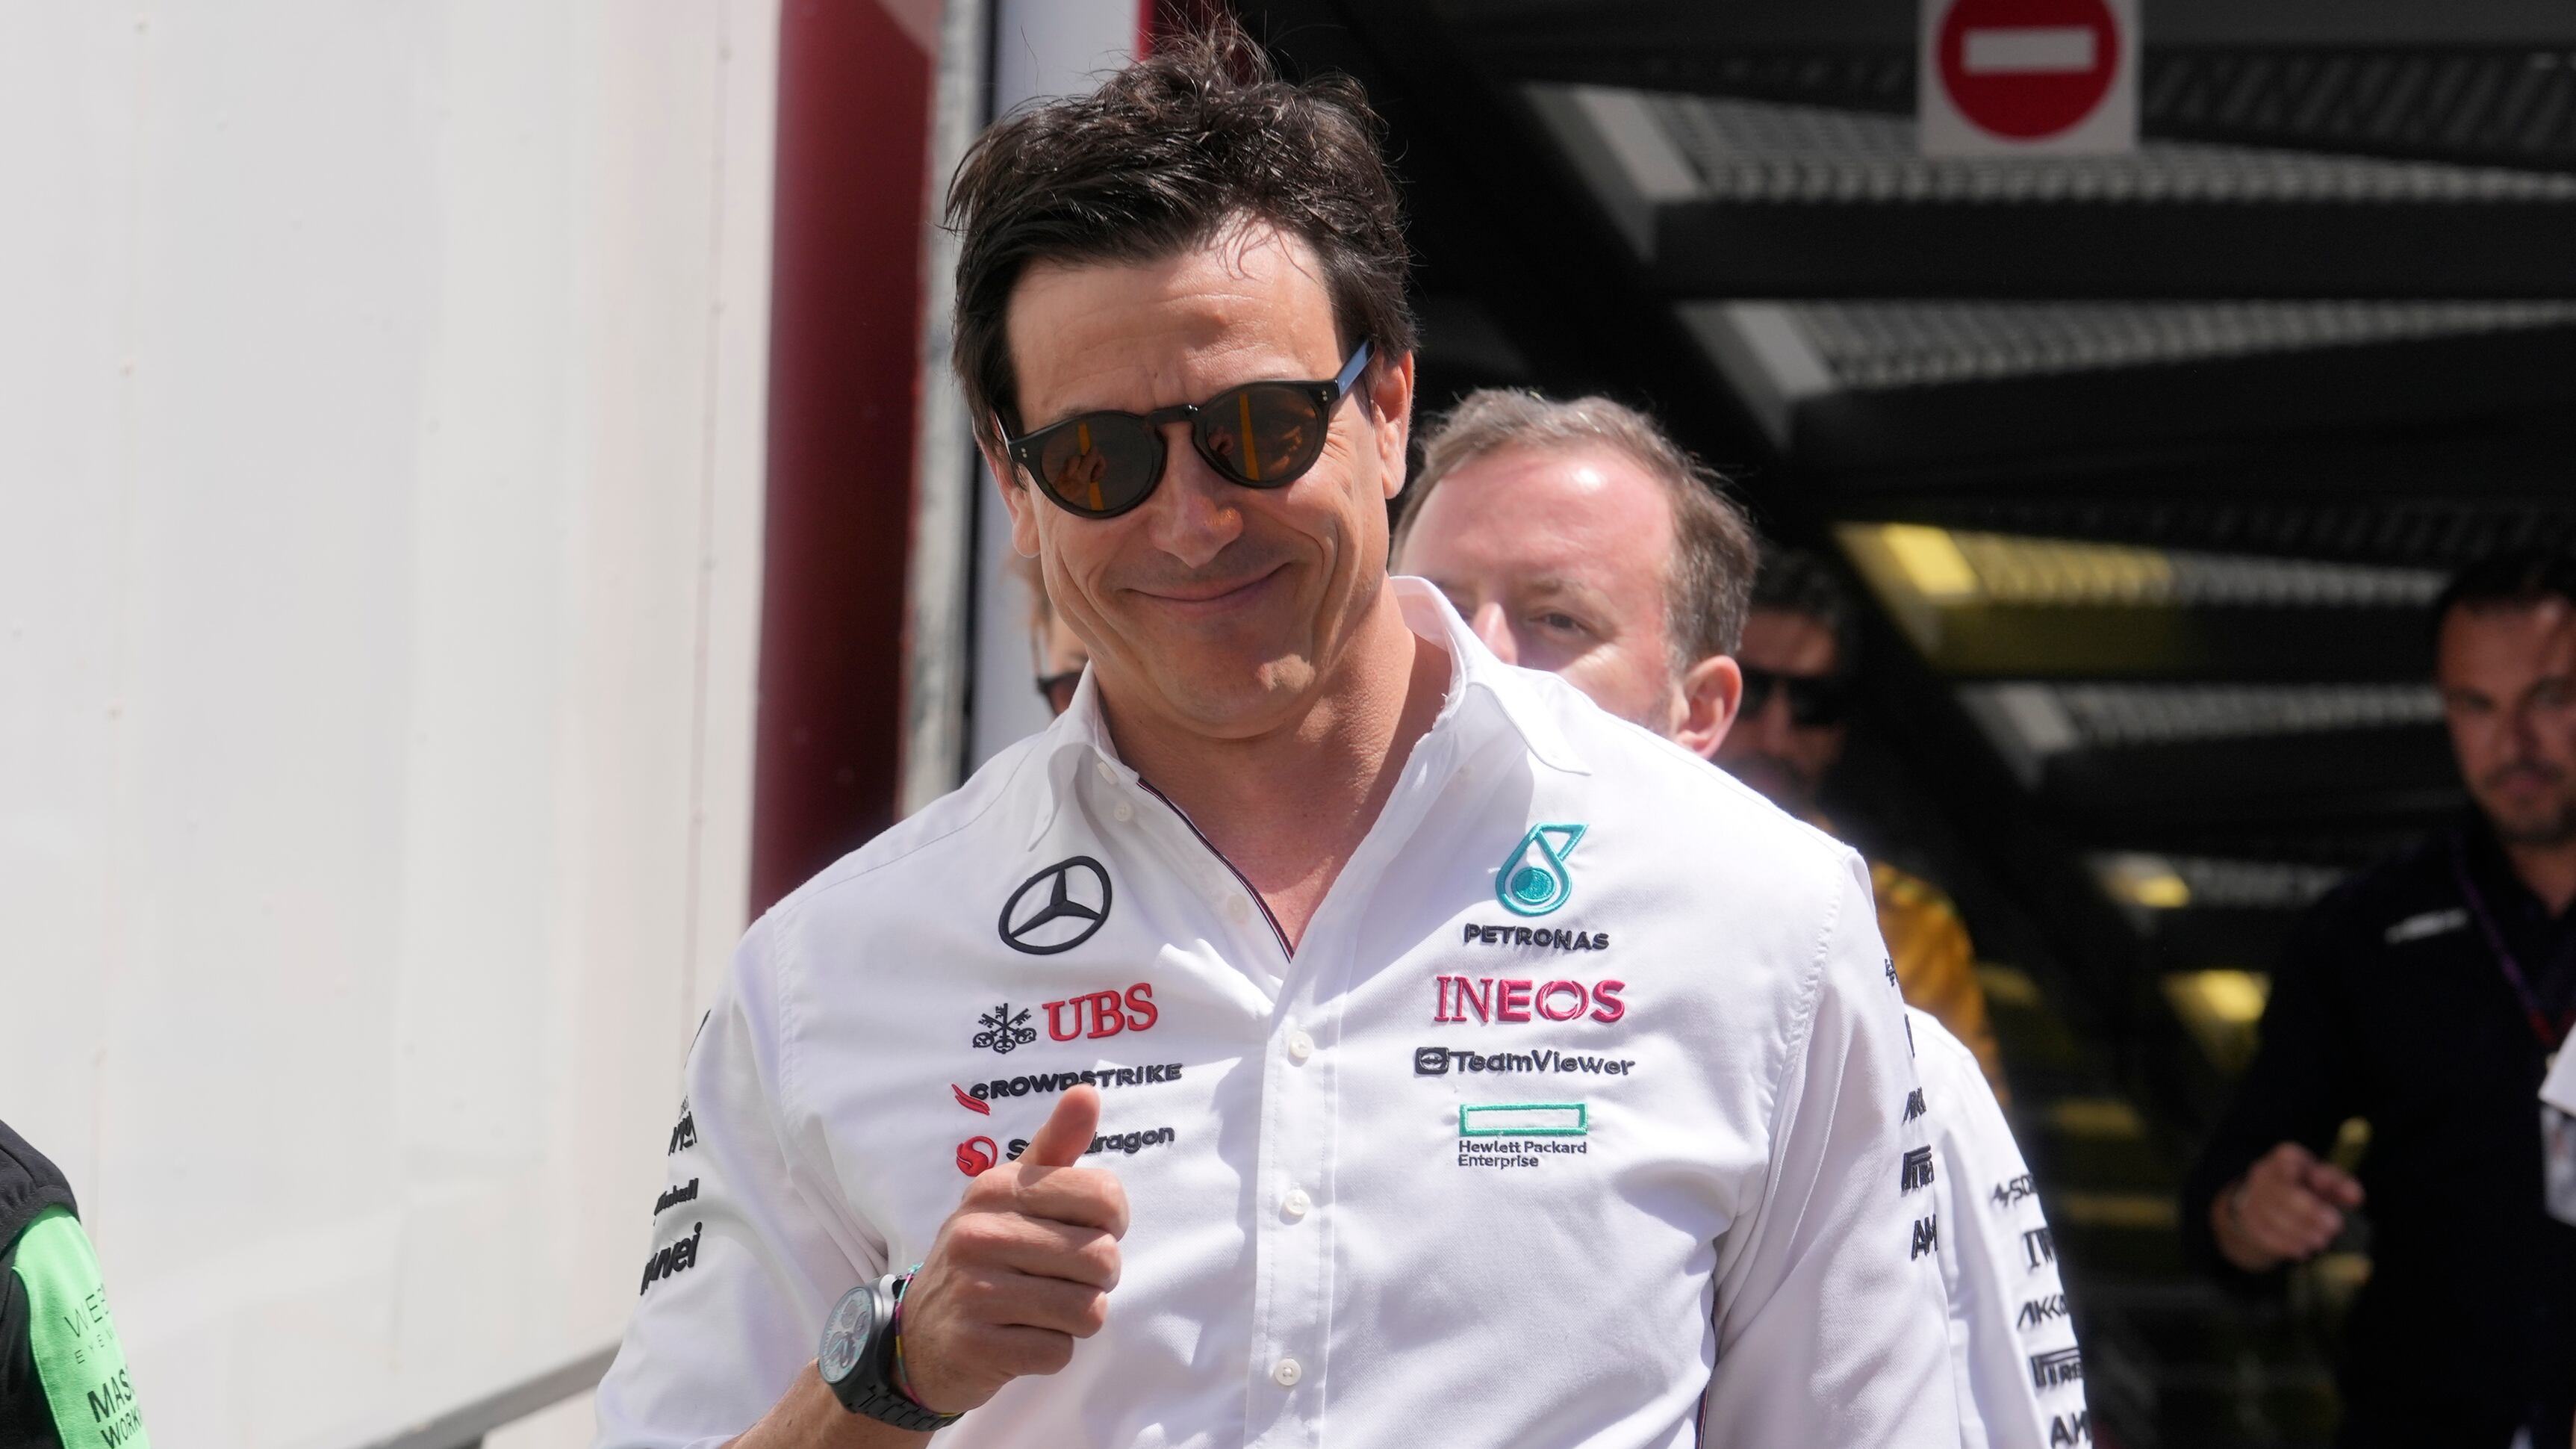 Mercedes boss Toto Wolff at the Canadian Grand Prix (AP Photo/Luca Bruno)